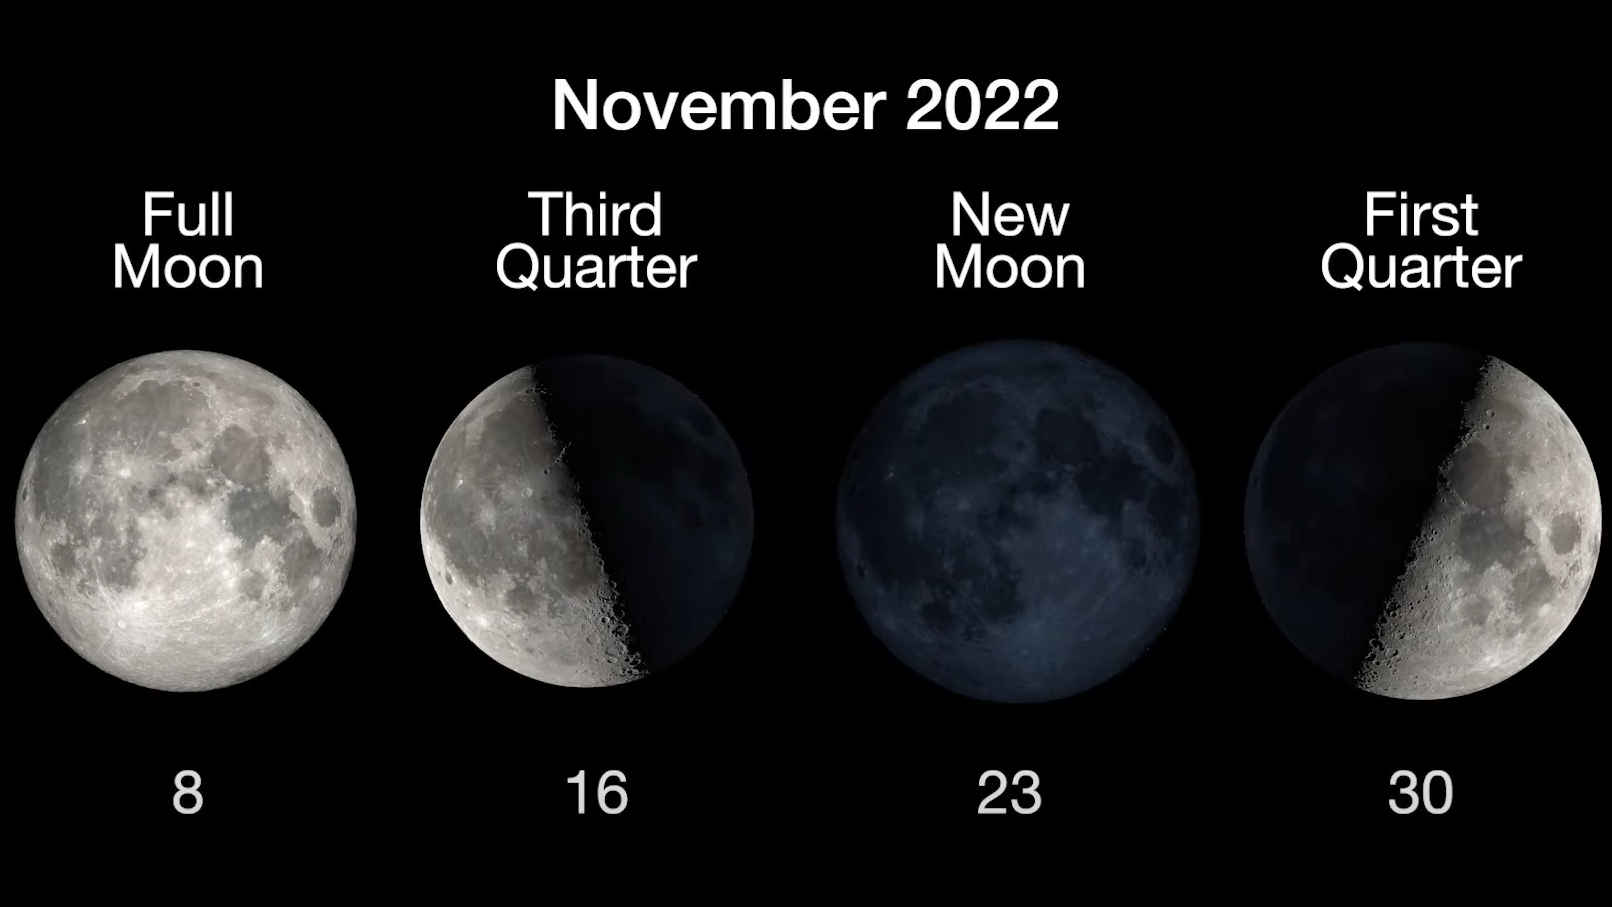 Graphic showing the moon phases and dates in November. The full moon is Nov. 8, the Third Quarter is Nov. 16, the New Moon is Nov. 23 and the First Quarter is Nov. 30.